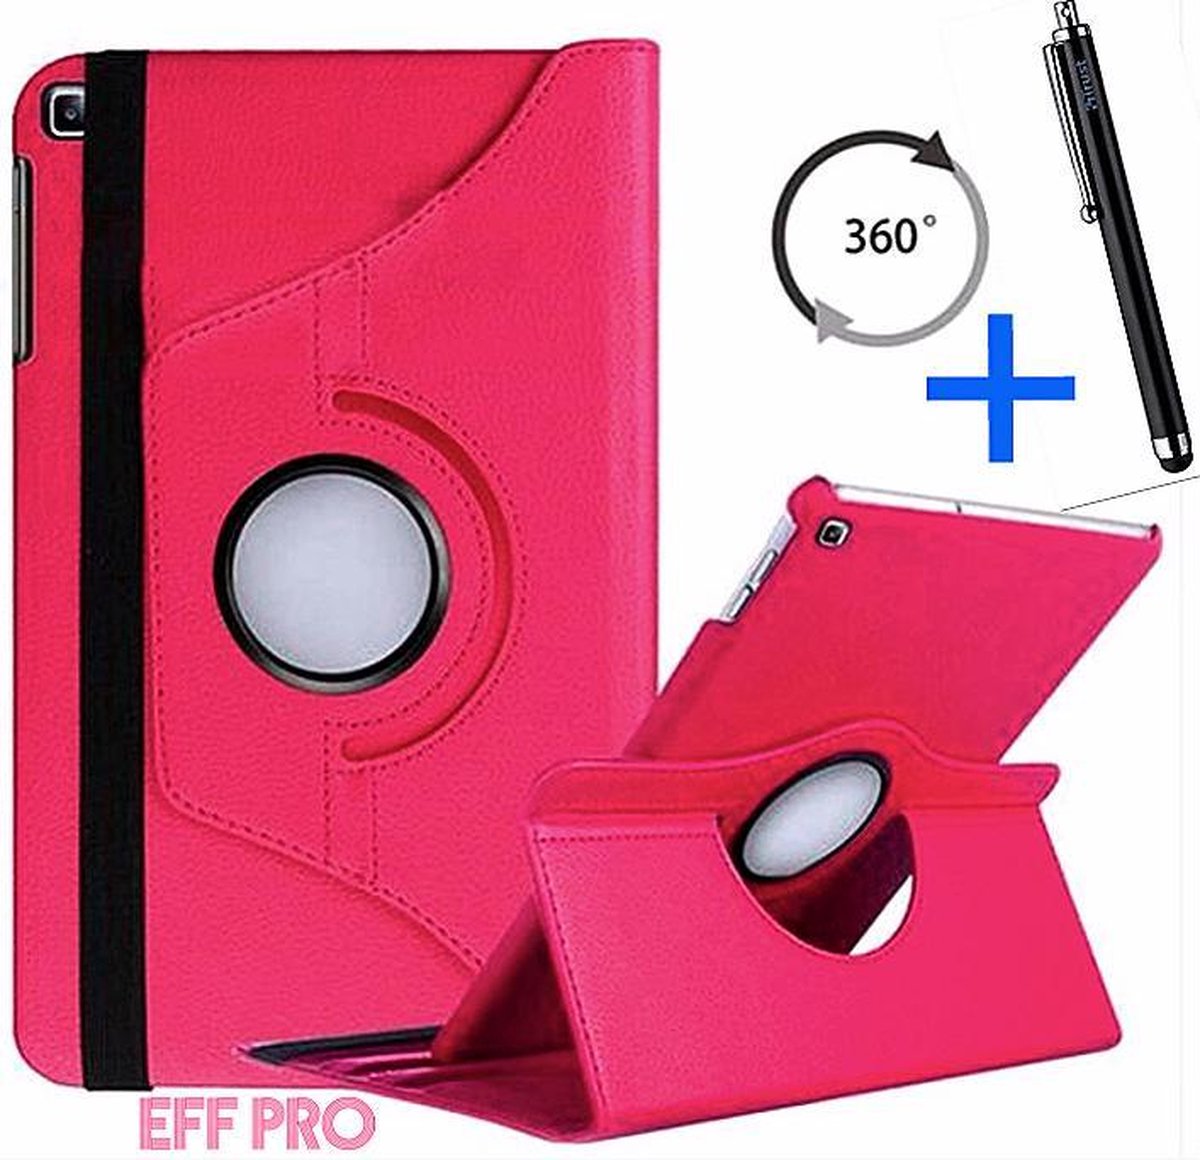 Samsung Galaxy Tab A 10.1 (2019) Tablet Hoes met Stylus Pen 360° draaistand Cover Tablet hoesje Roze – Eff Pro